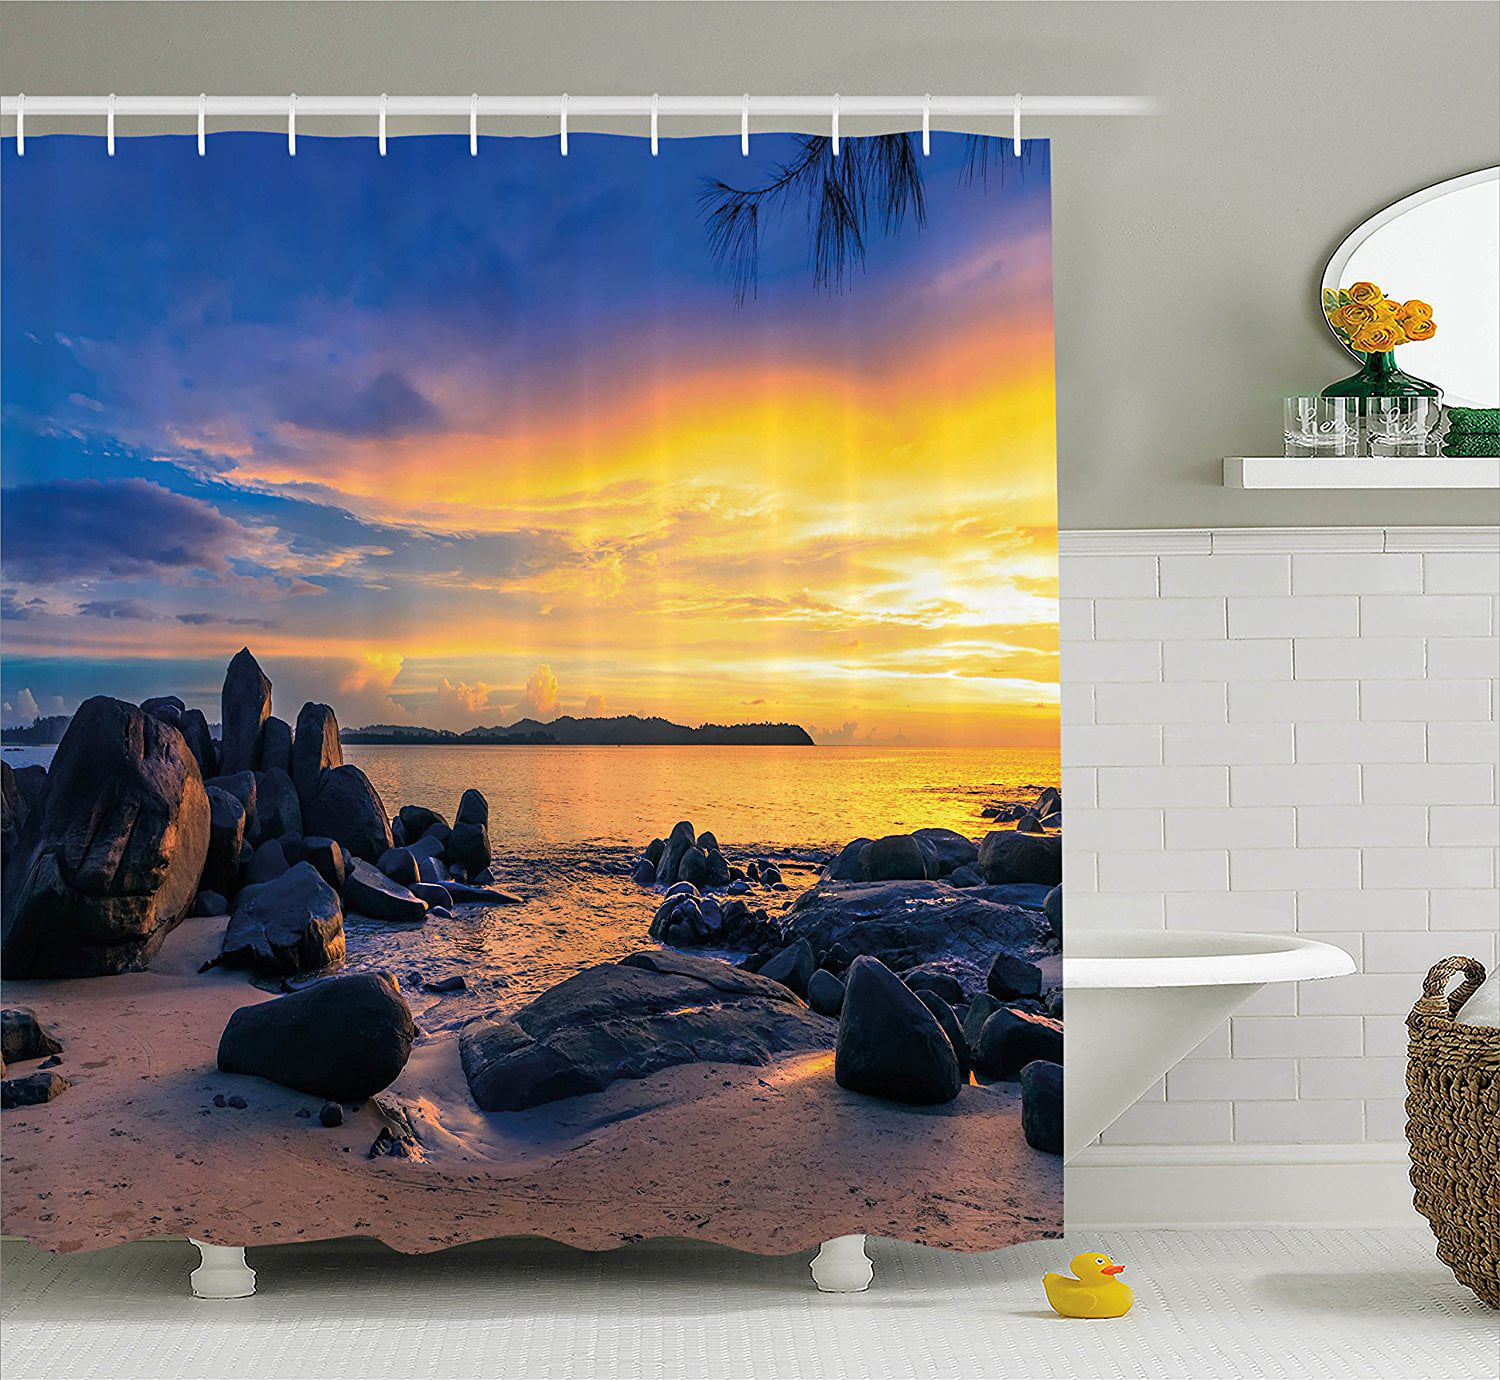 Sunset Shower Curtain by , Horizon Sky at the Beach with Rocks Surreal ...